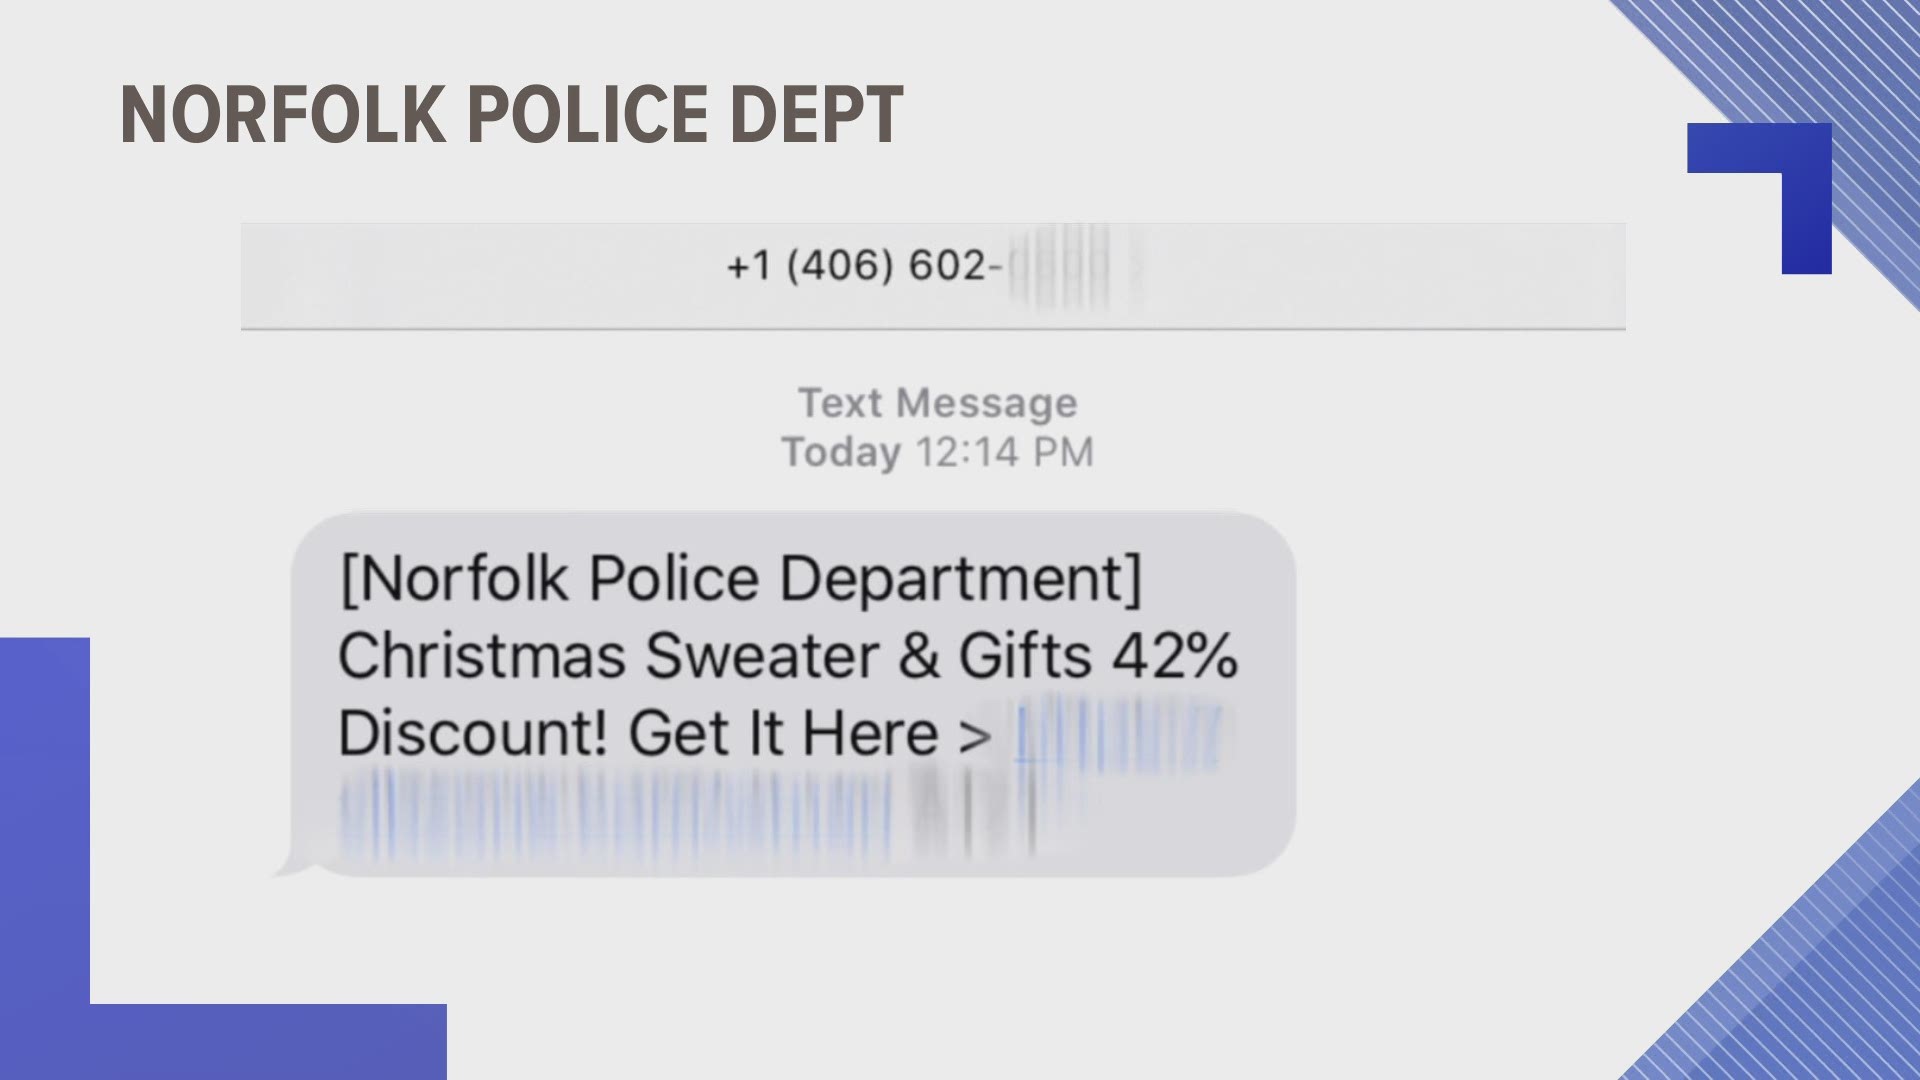 The department posted on Facebook that they were not selling sweaters, and if anyone got a text that offered one - it was dangerous to click on the link.